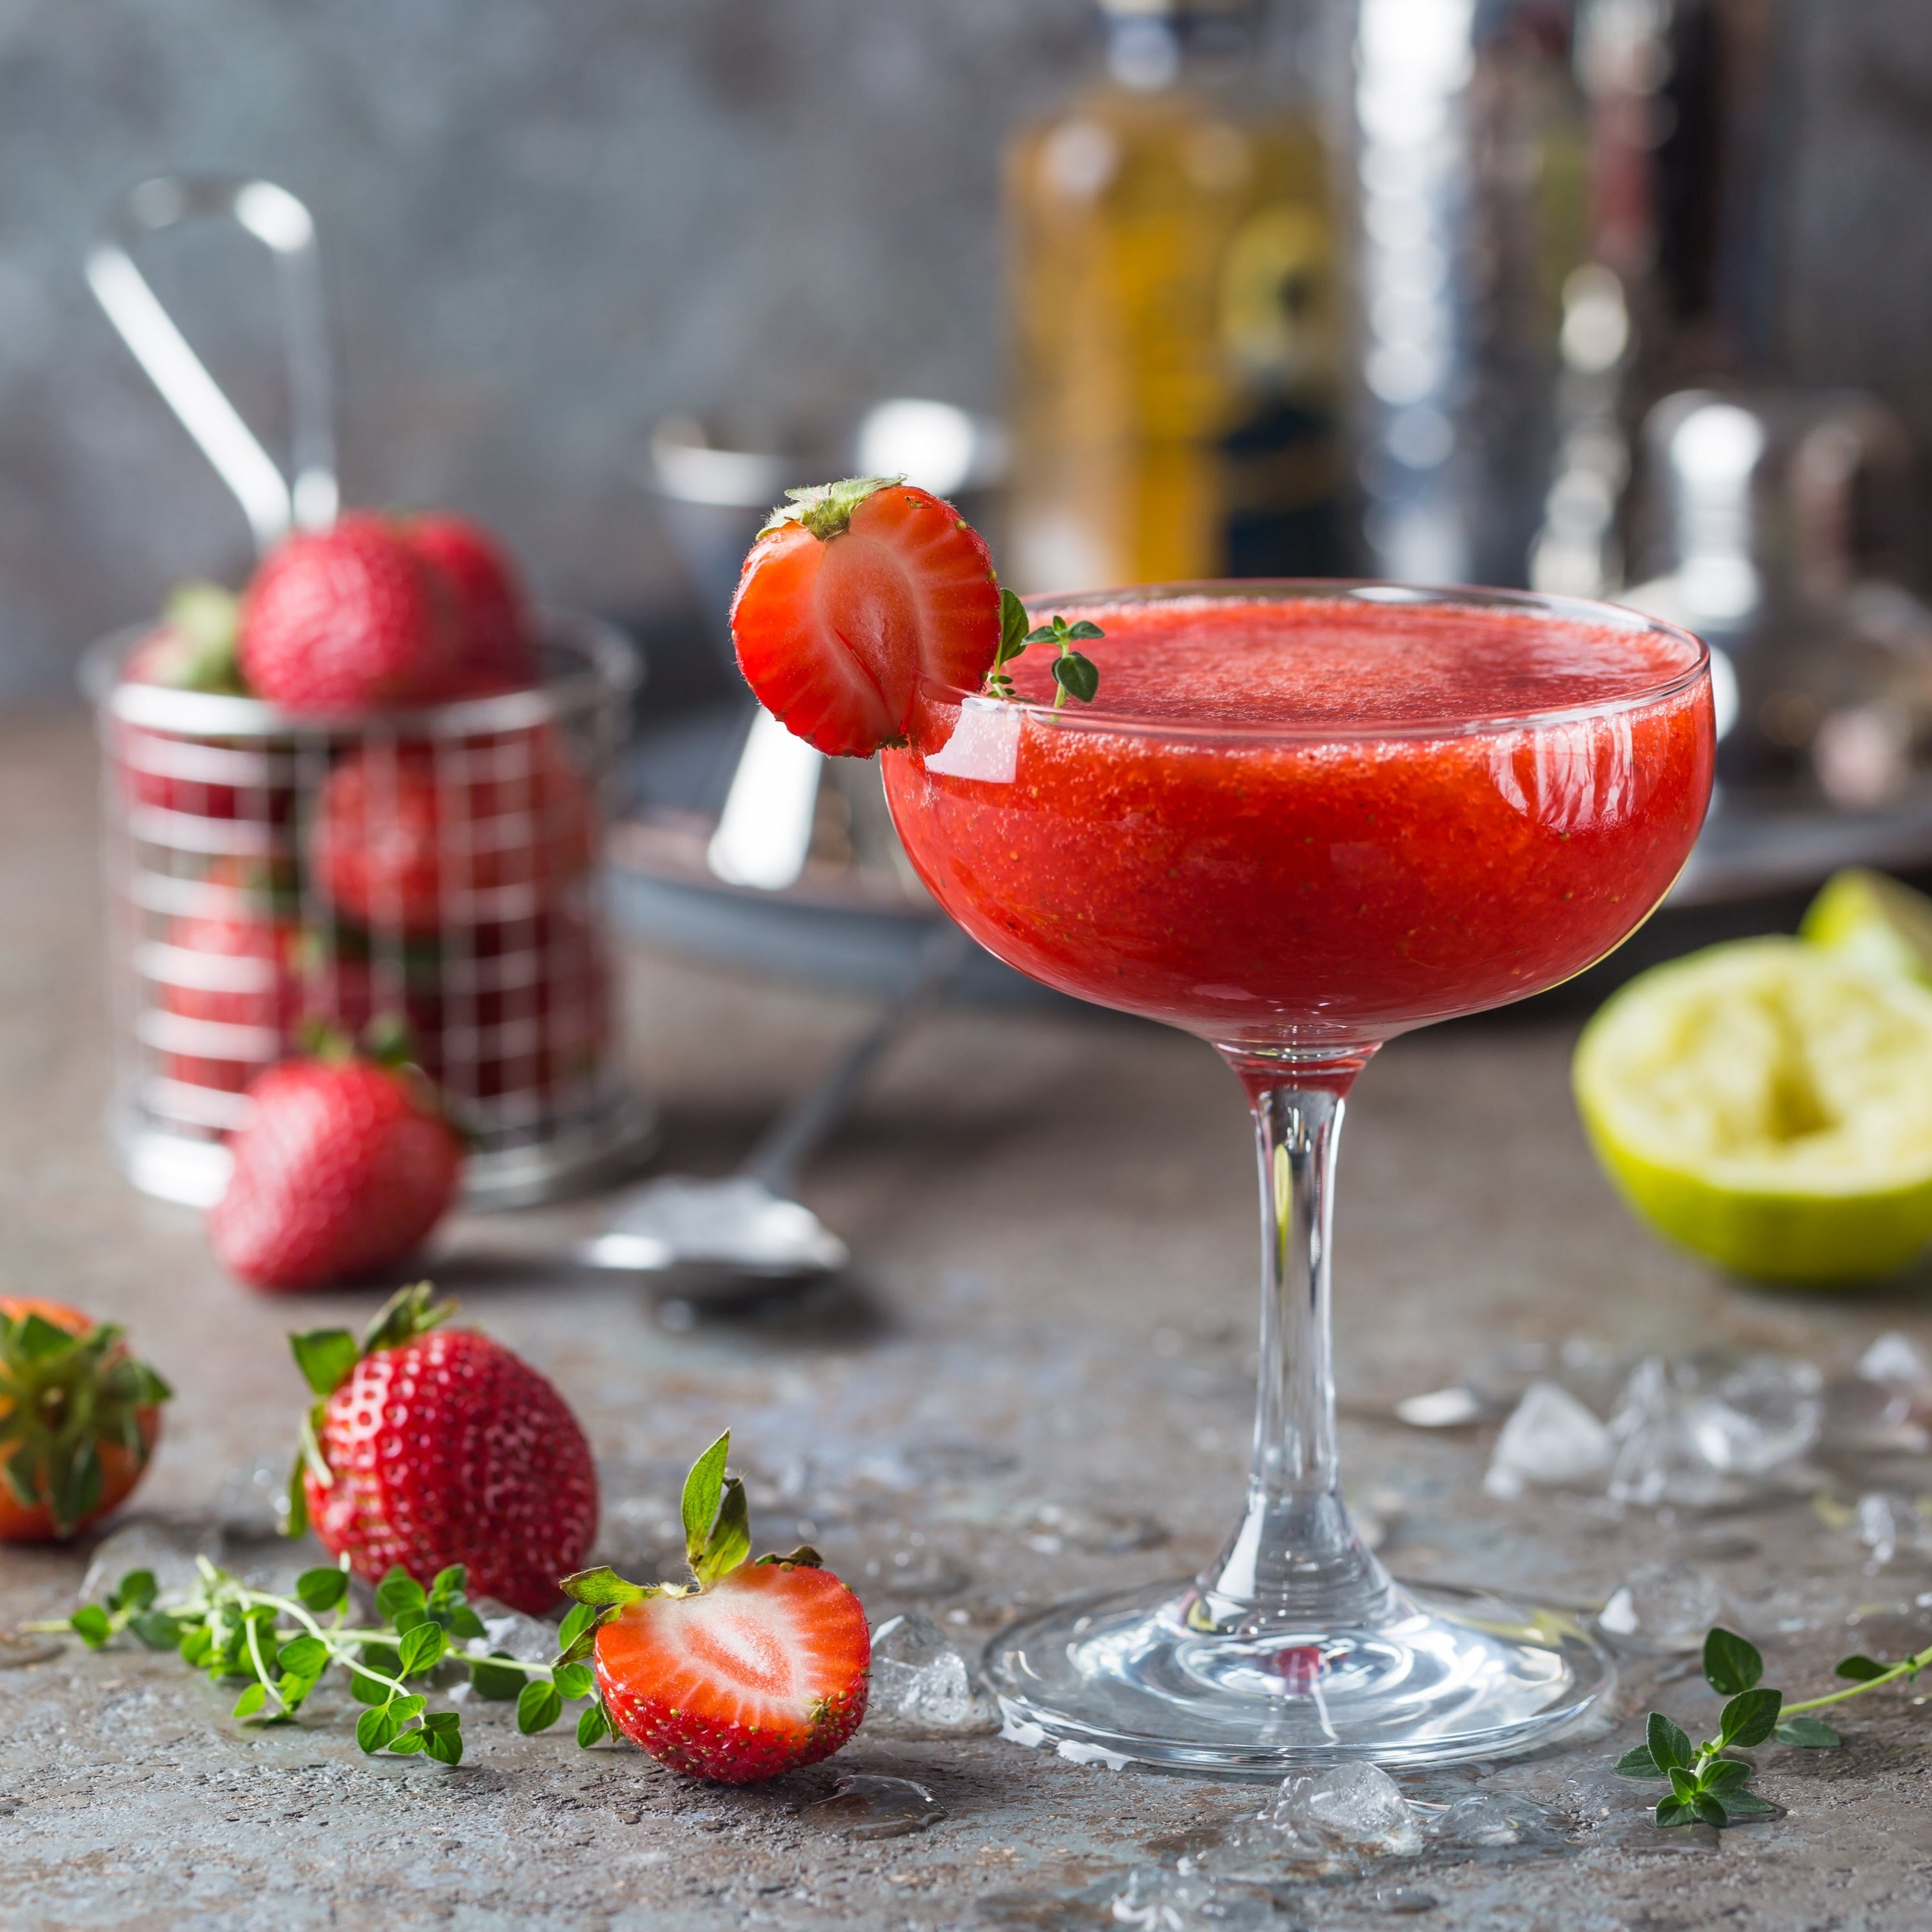 A refreshing *Strawberry Daiquiri (12 oz) – Sunset Beach Bar Collection* garnished with a sliced strawberry and a sprig of thyme is surrounded by fresh strawberries, a halved lime, and some green herbs on a rustic table. *Tuscany Candle® SEASONAL*.